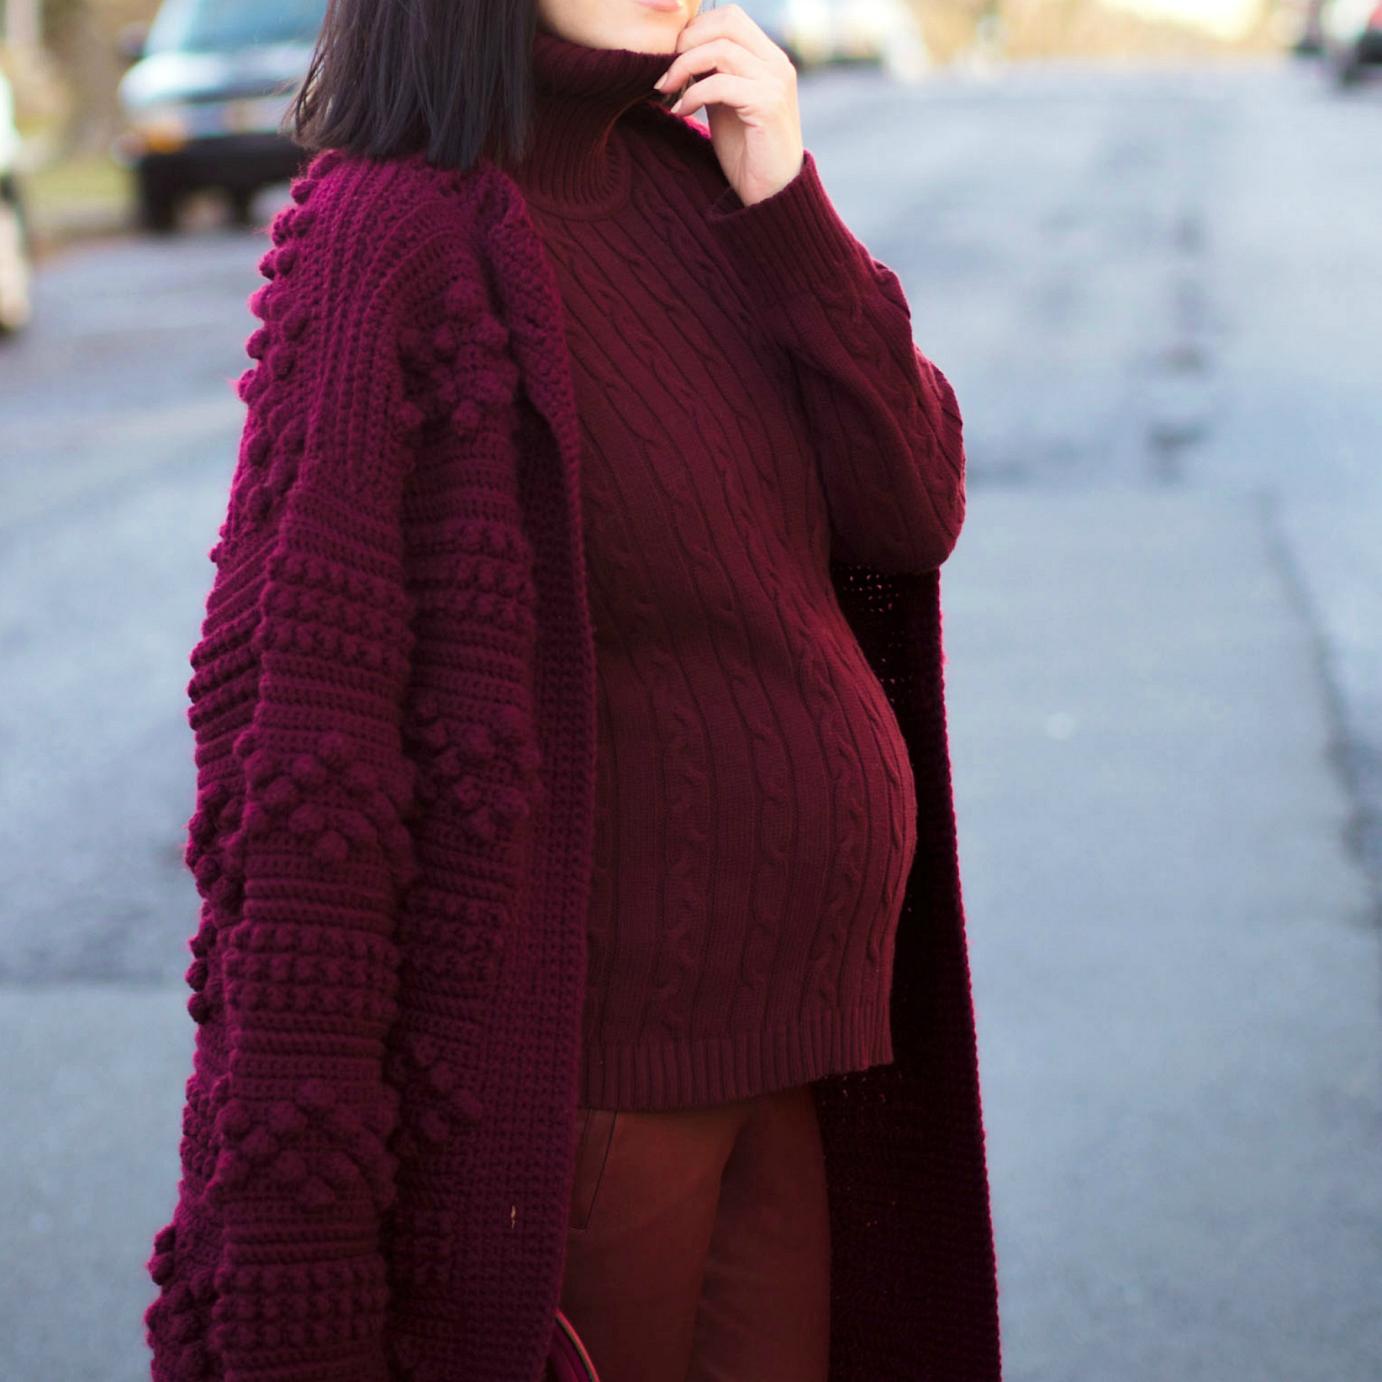 bittersweet colours, street style, winter trends, burgundy cardigan, vintage, burgundy color, monochrome look, reed krakoff bag, A.L.C pants, leather pants, maternity style, 30 weeks